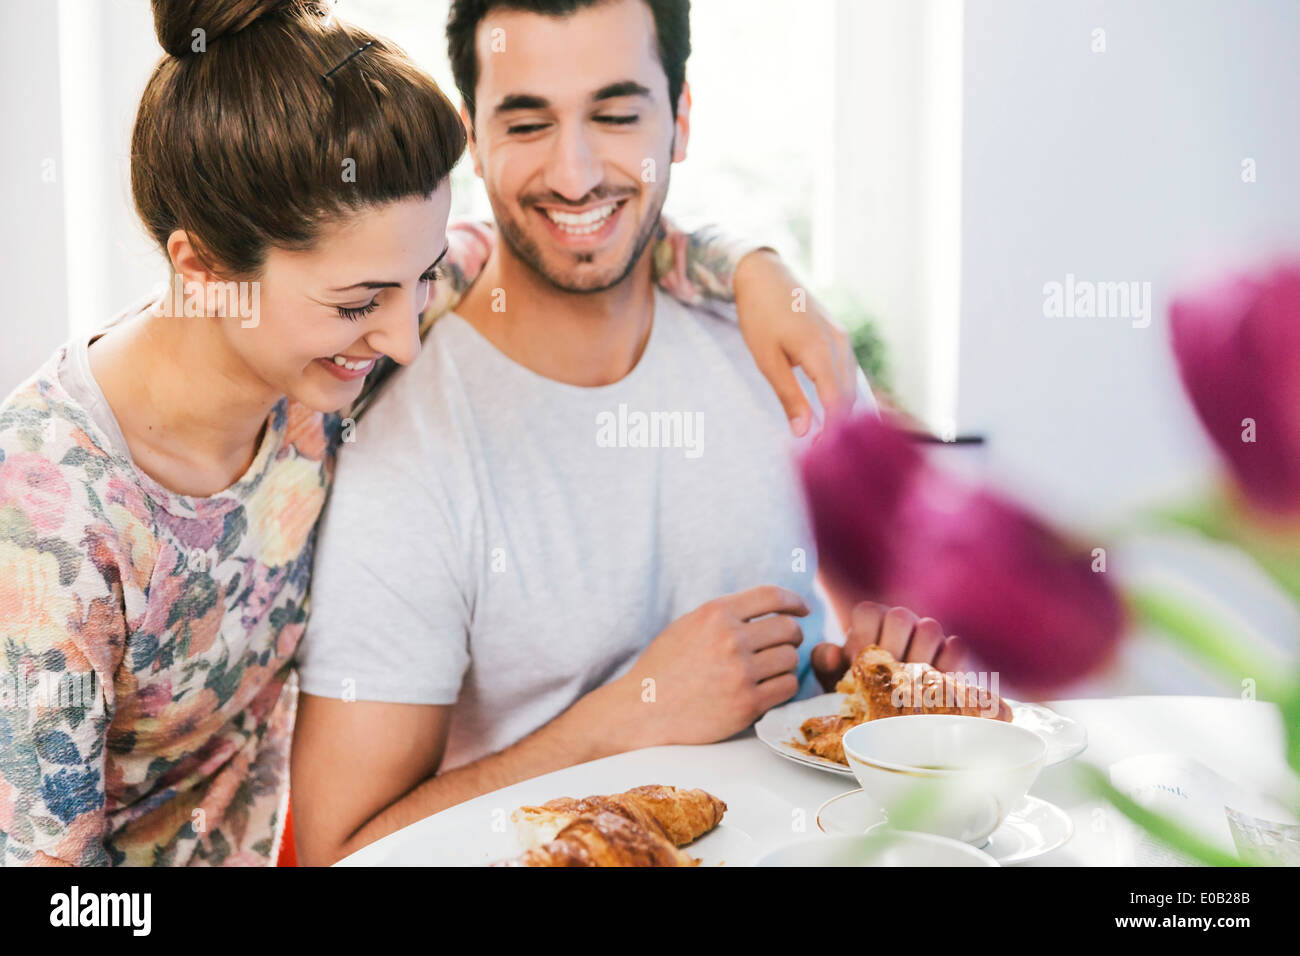 Laughing young couple at breakfast table Stock Photo